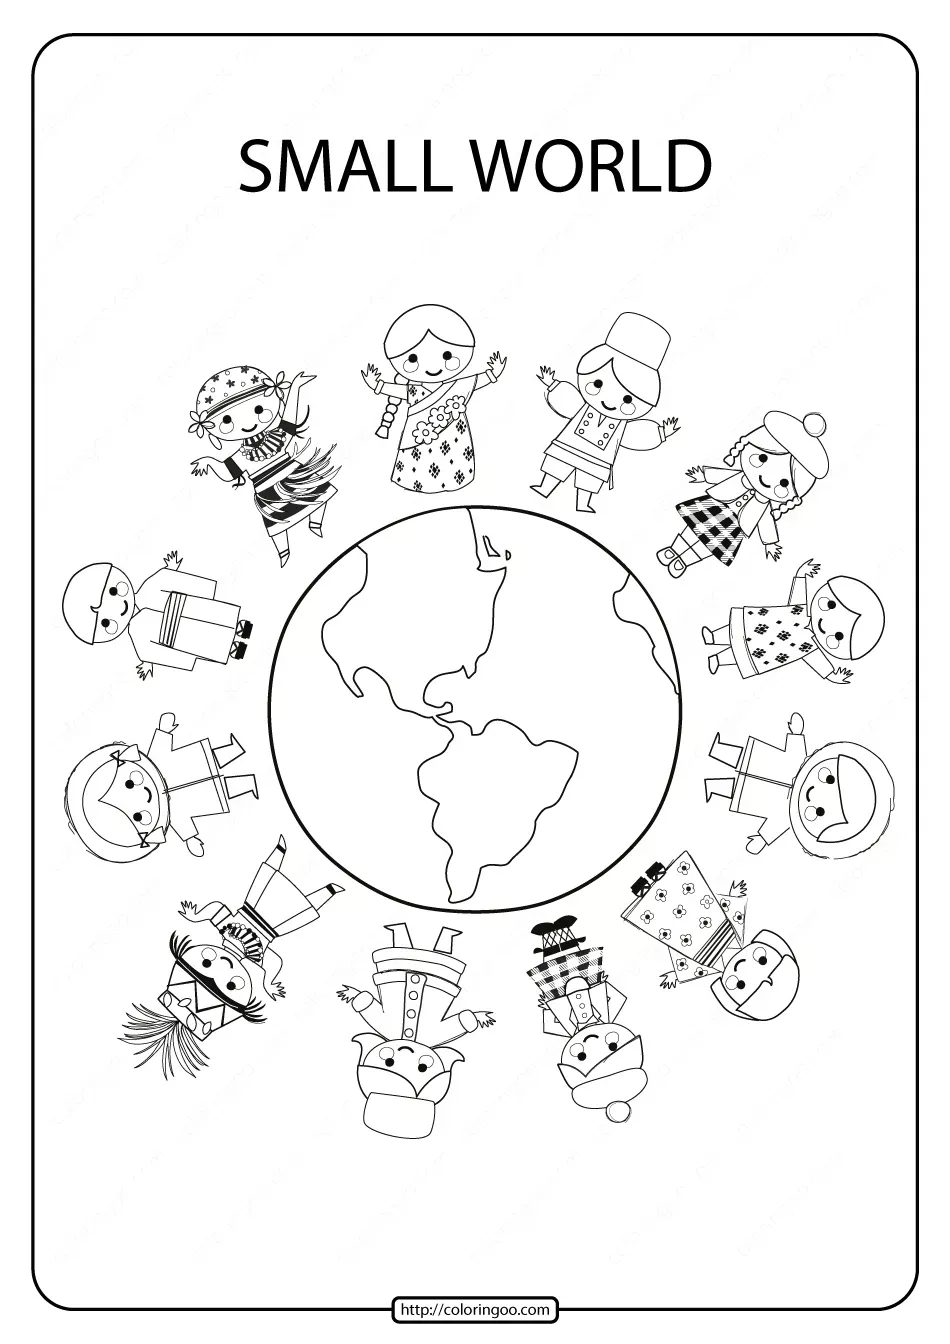 Printable small world pdf coloring page high quality free printable coloring drawing paintâ around the world theme kids around the world earth coloring pages